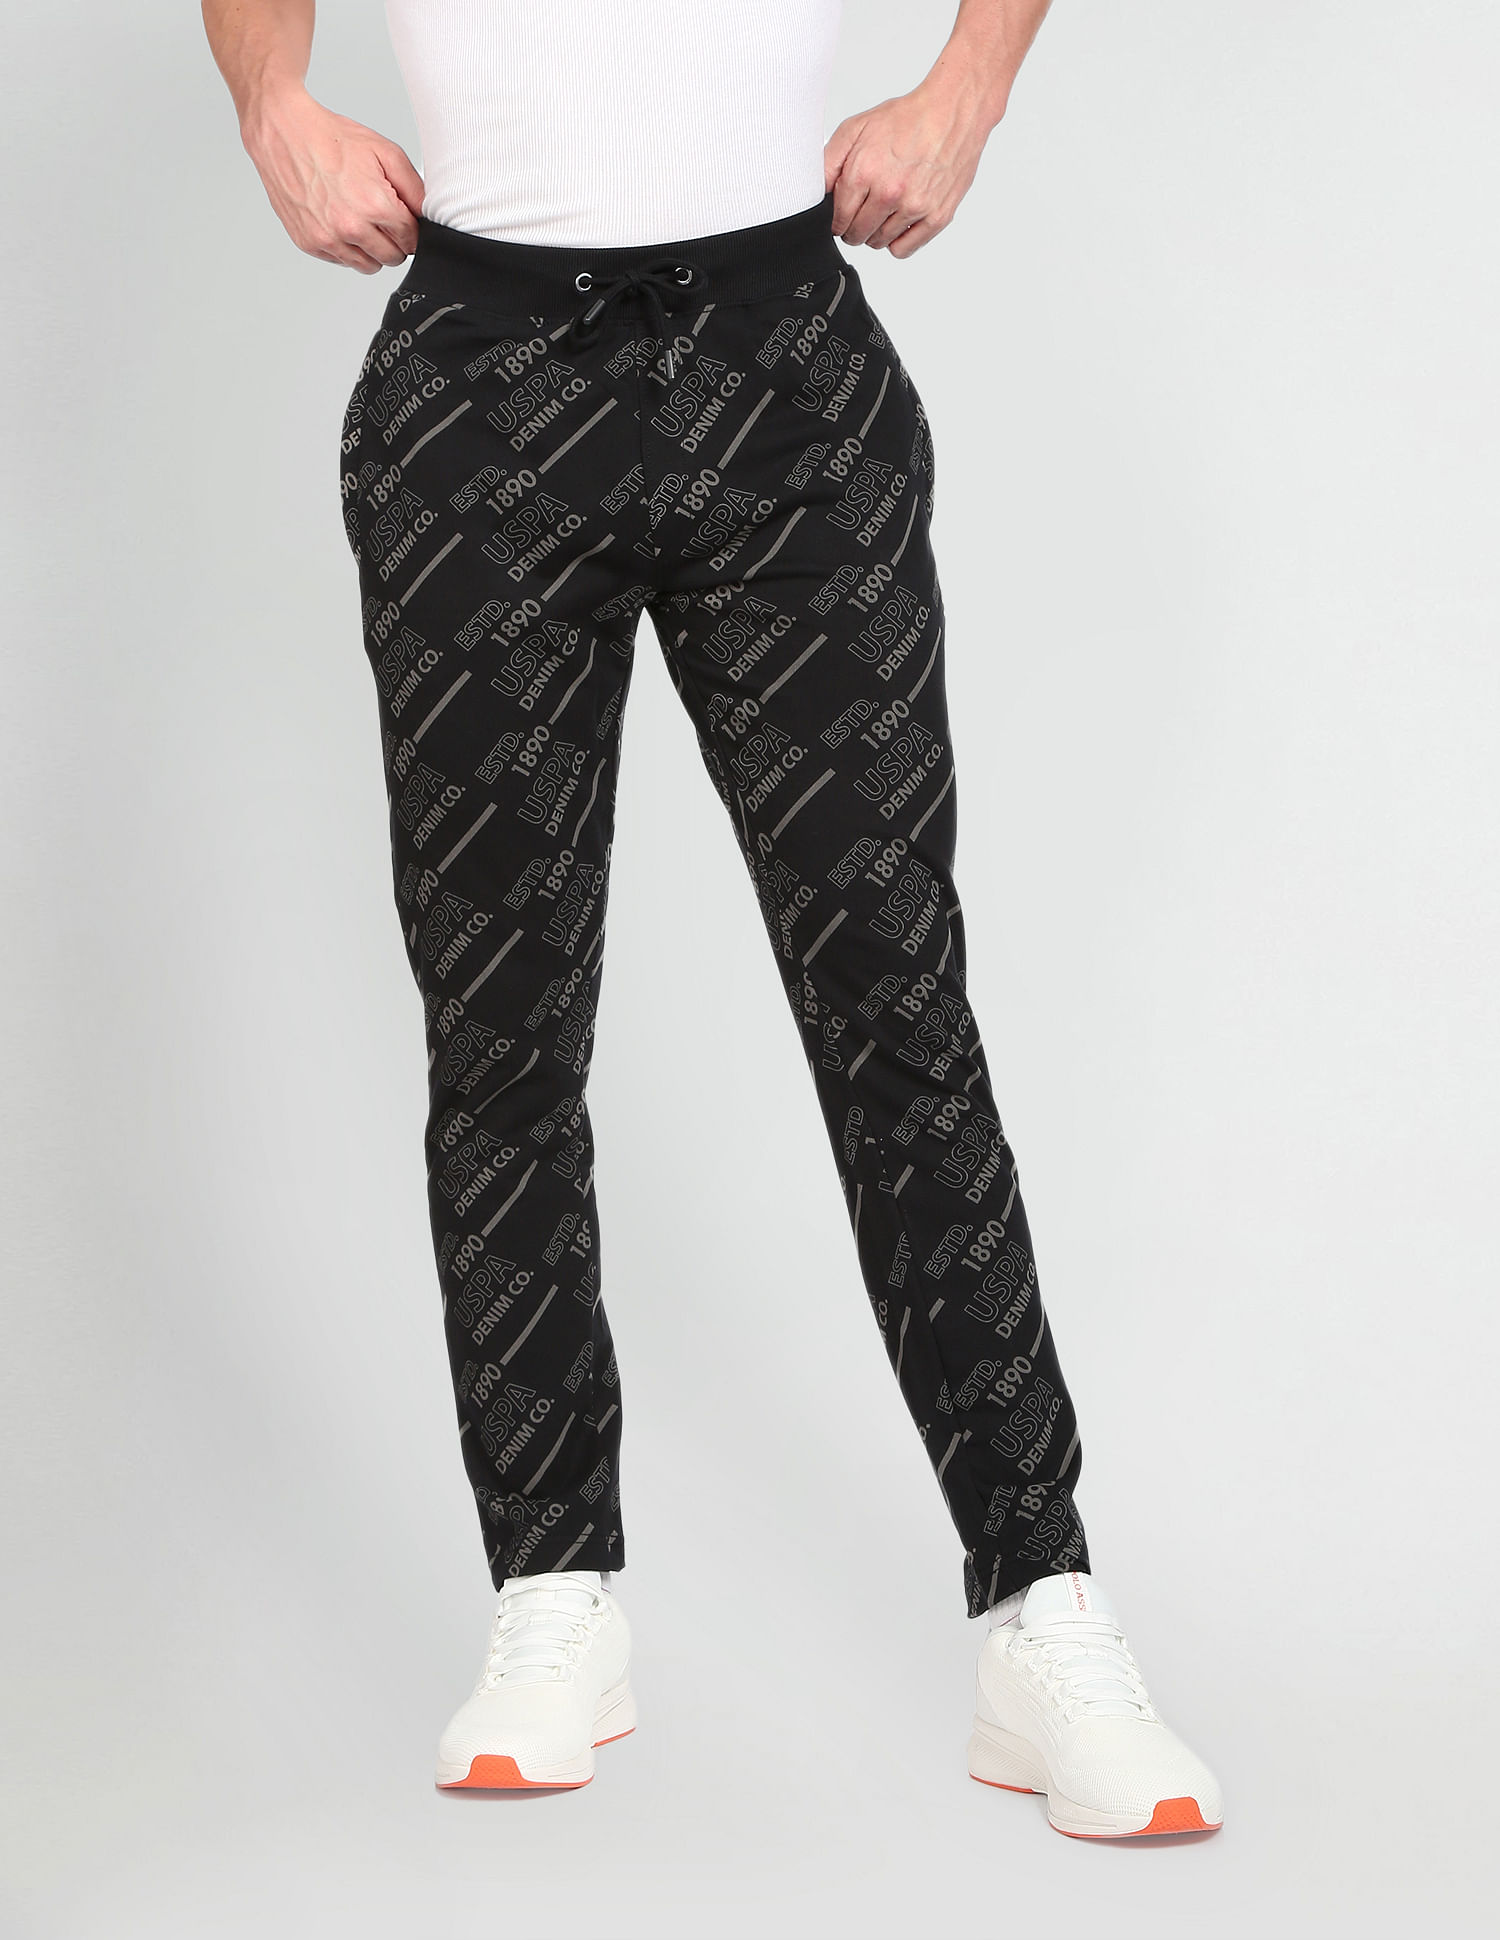 U.S. POLO ASSN. Solid Men Black Track Pants - Price History